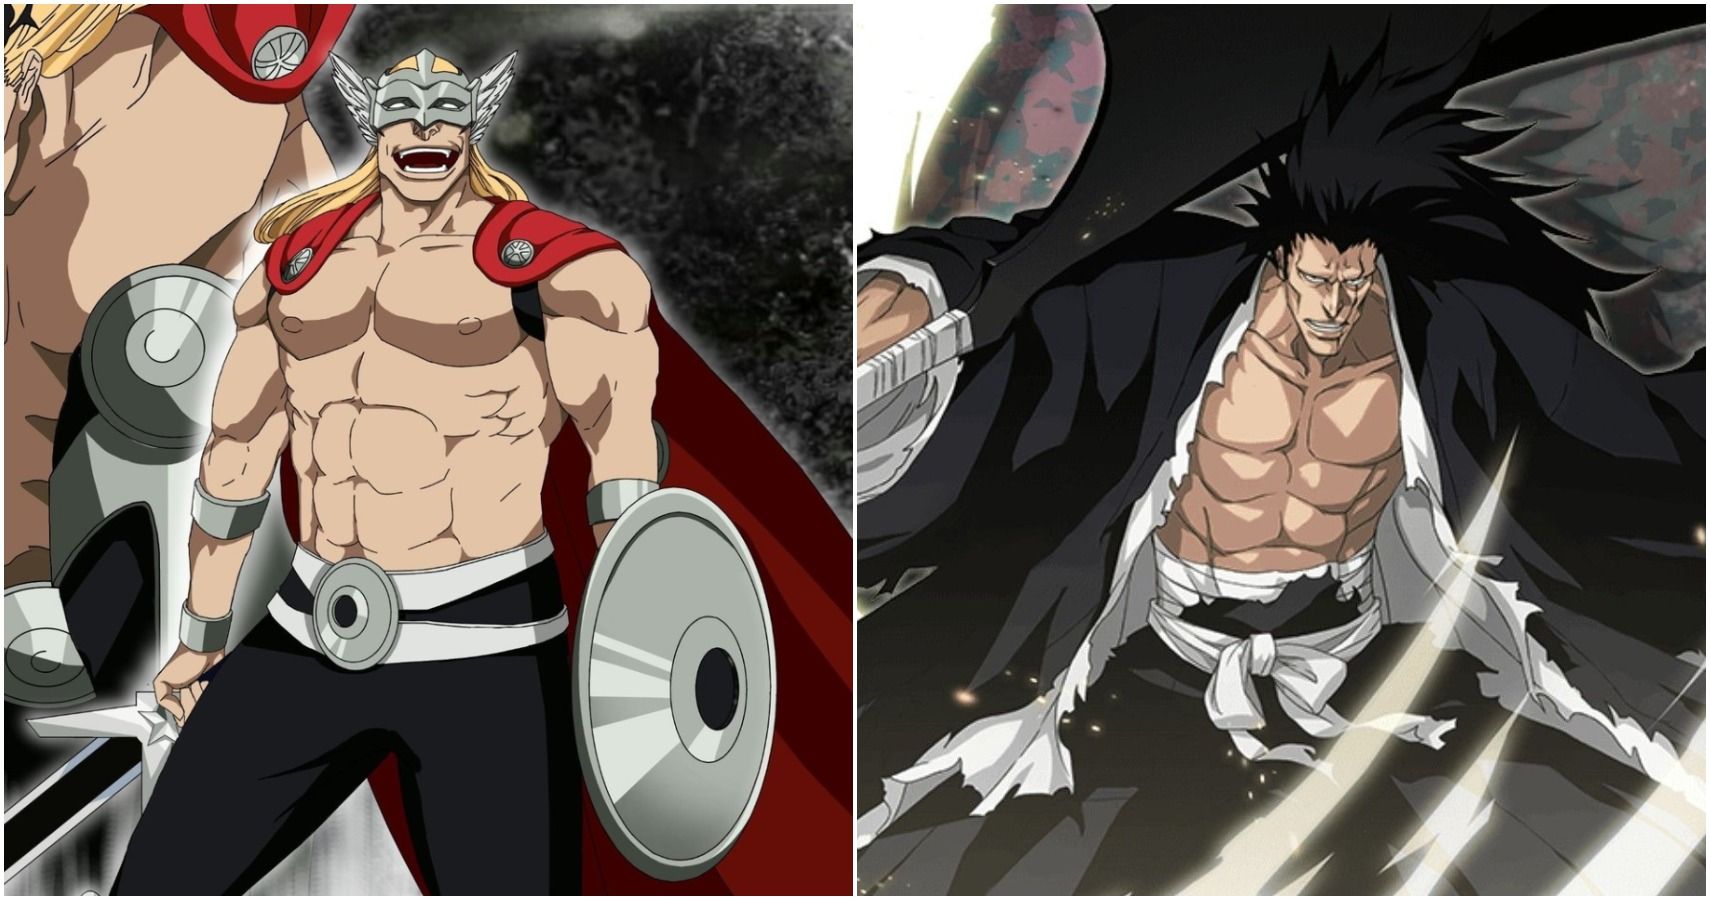 The 5 strongest characters in Bleach